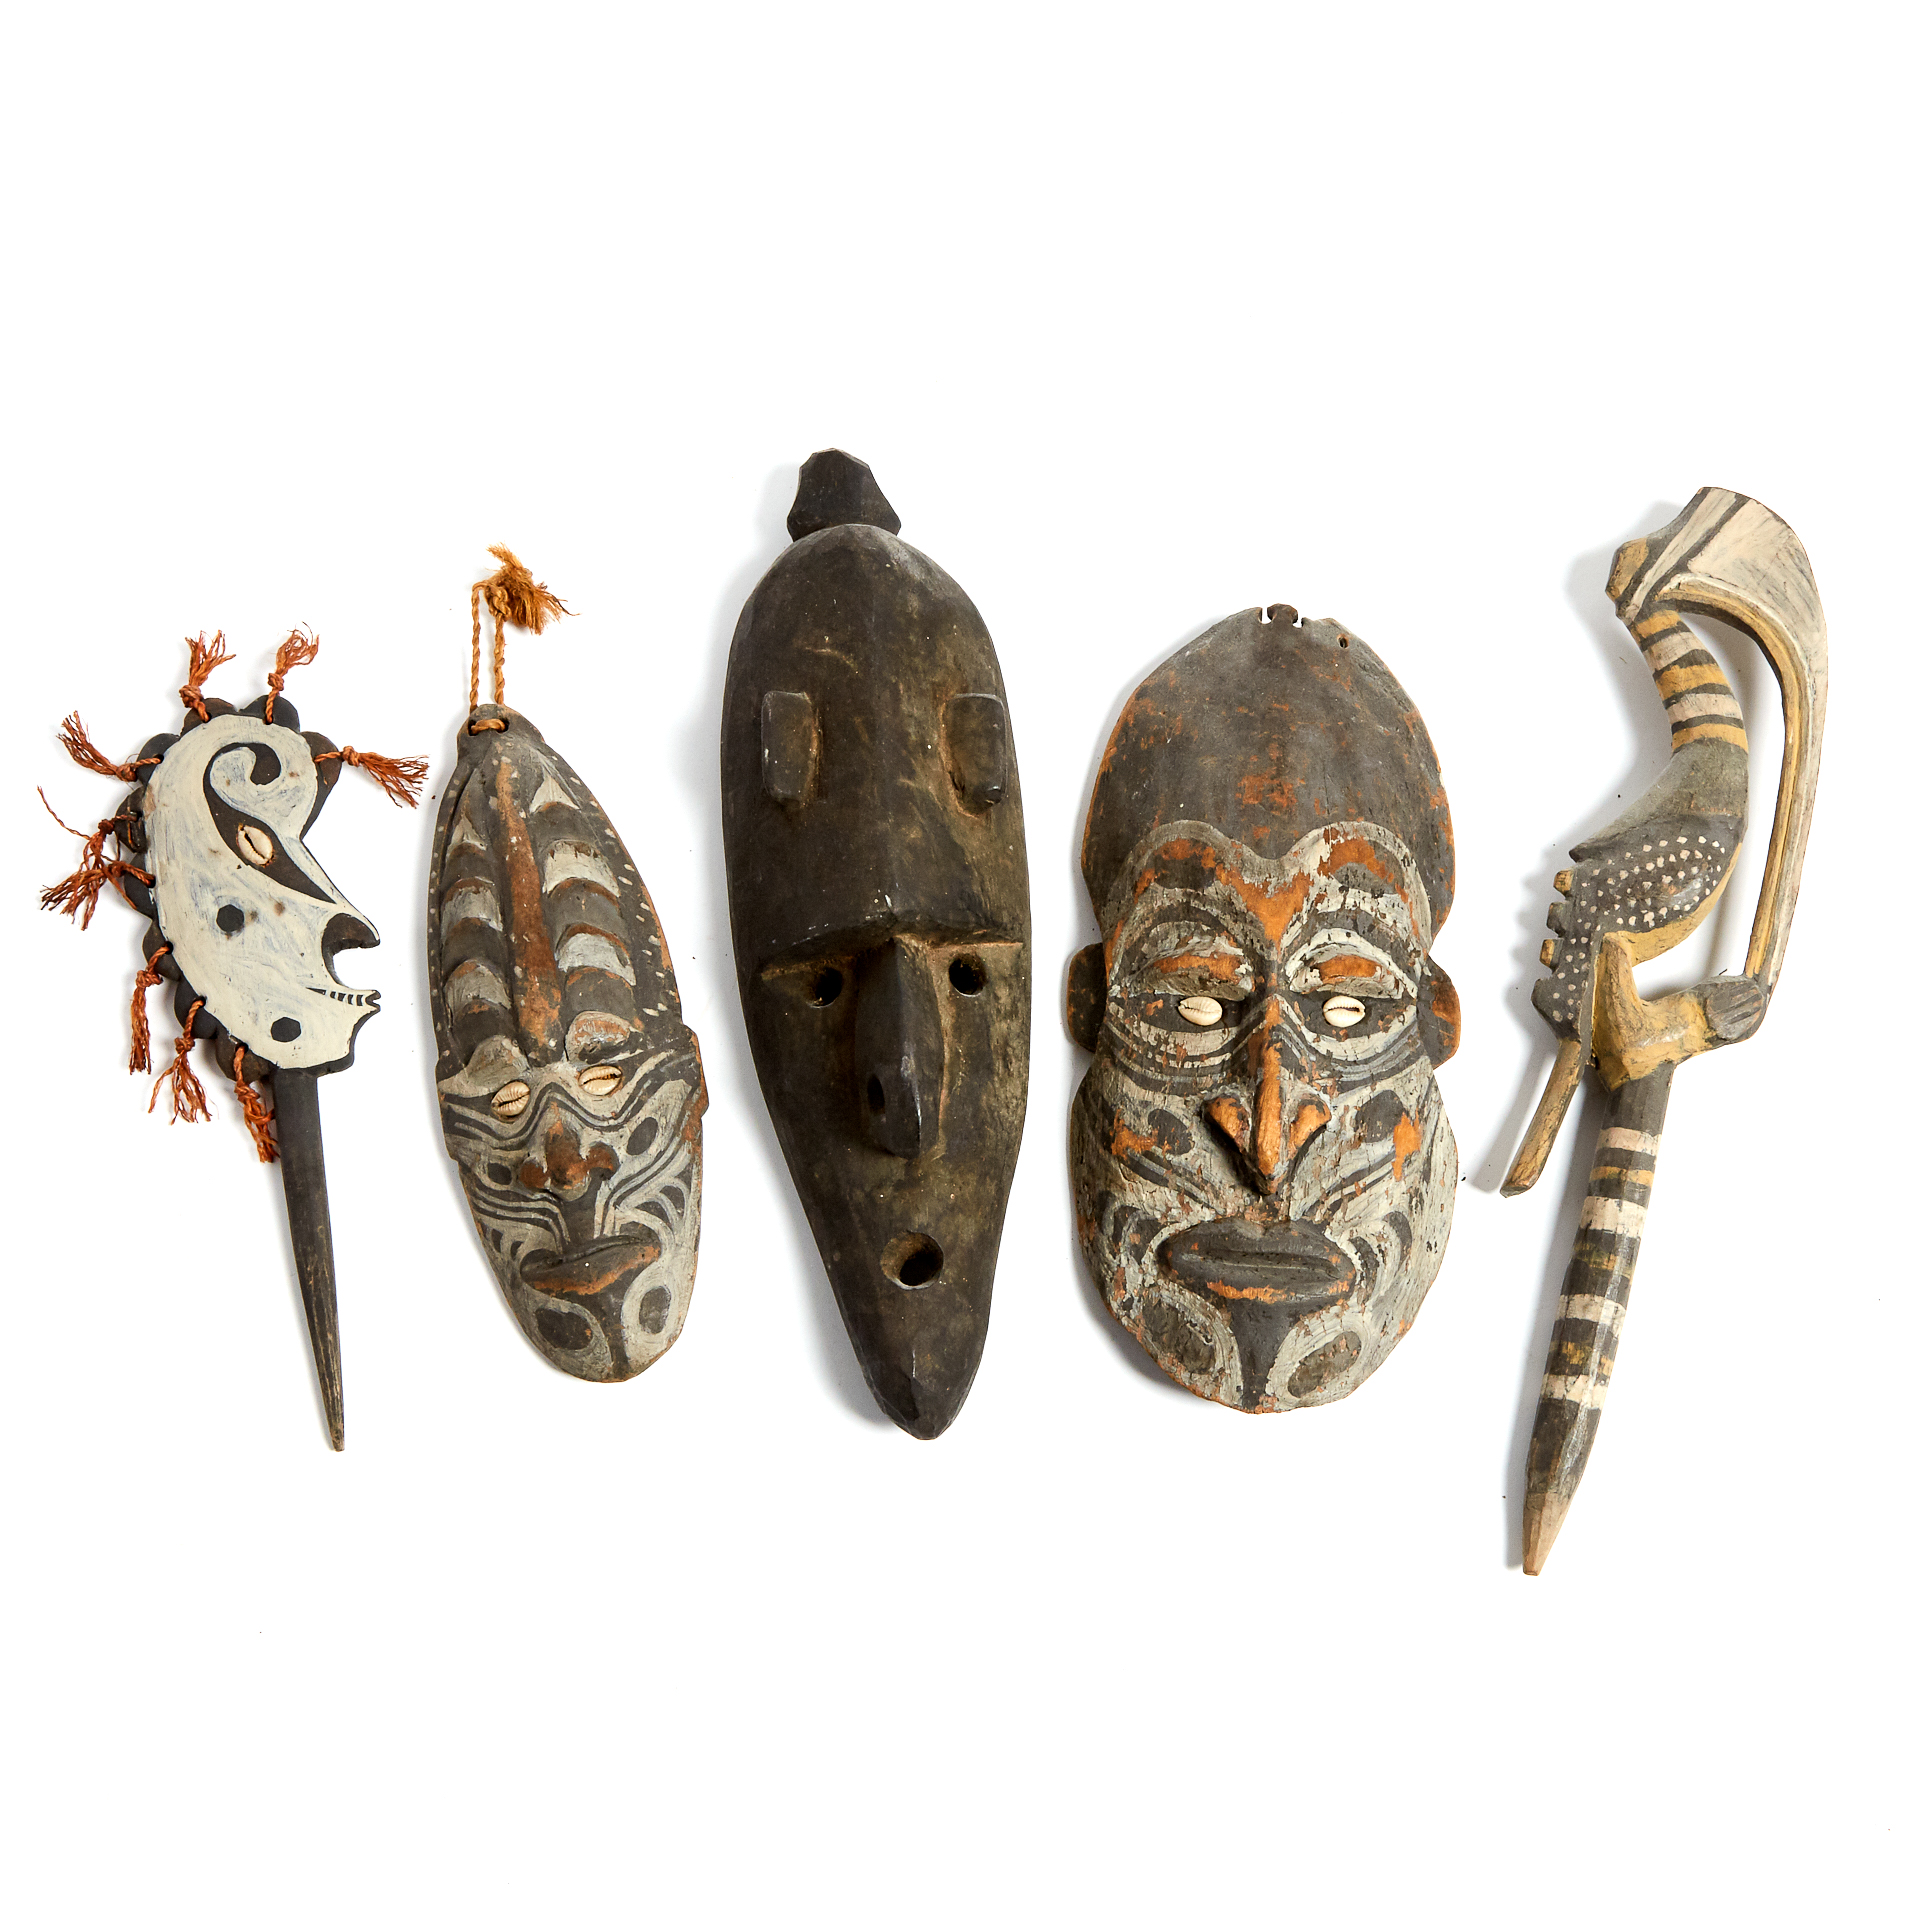 Group of Three Sepik River Masks together with two stakes one depicting a head the other a Hornbill